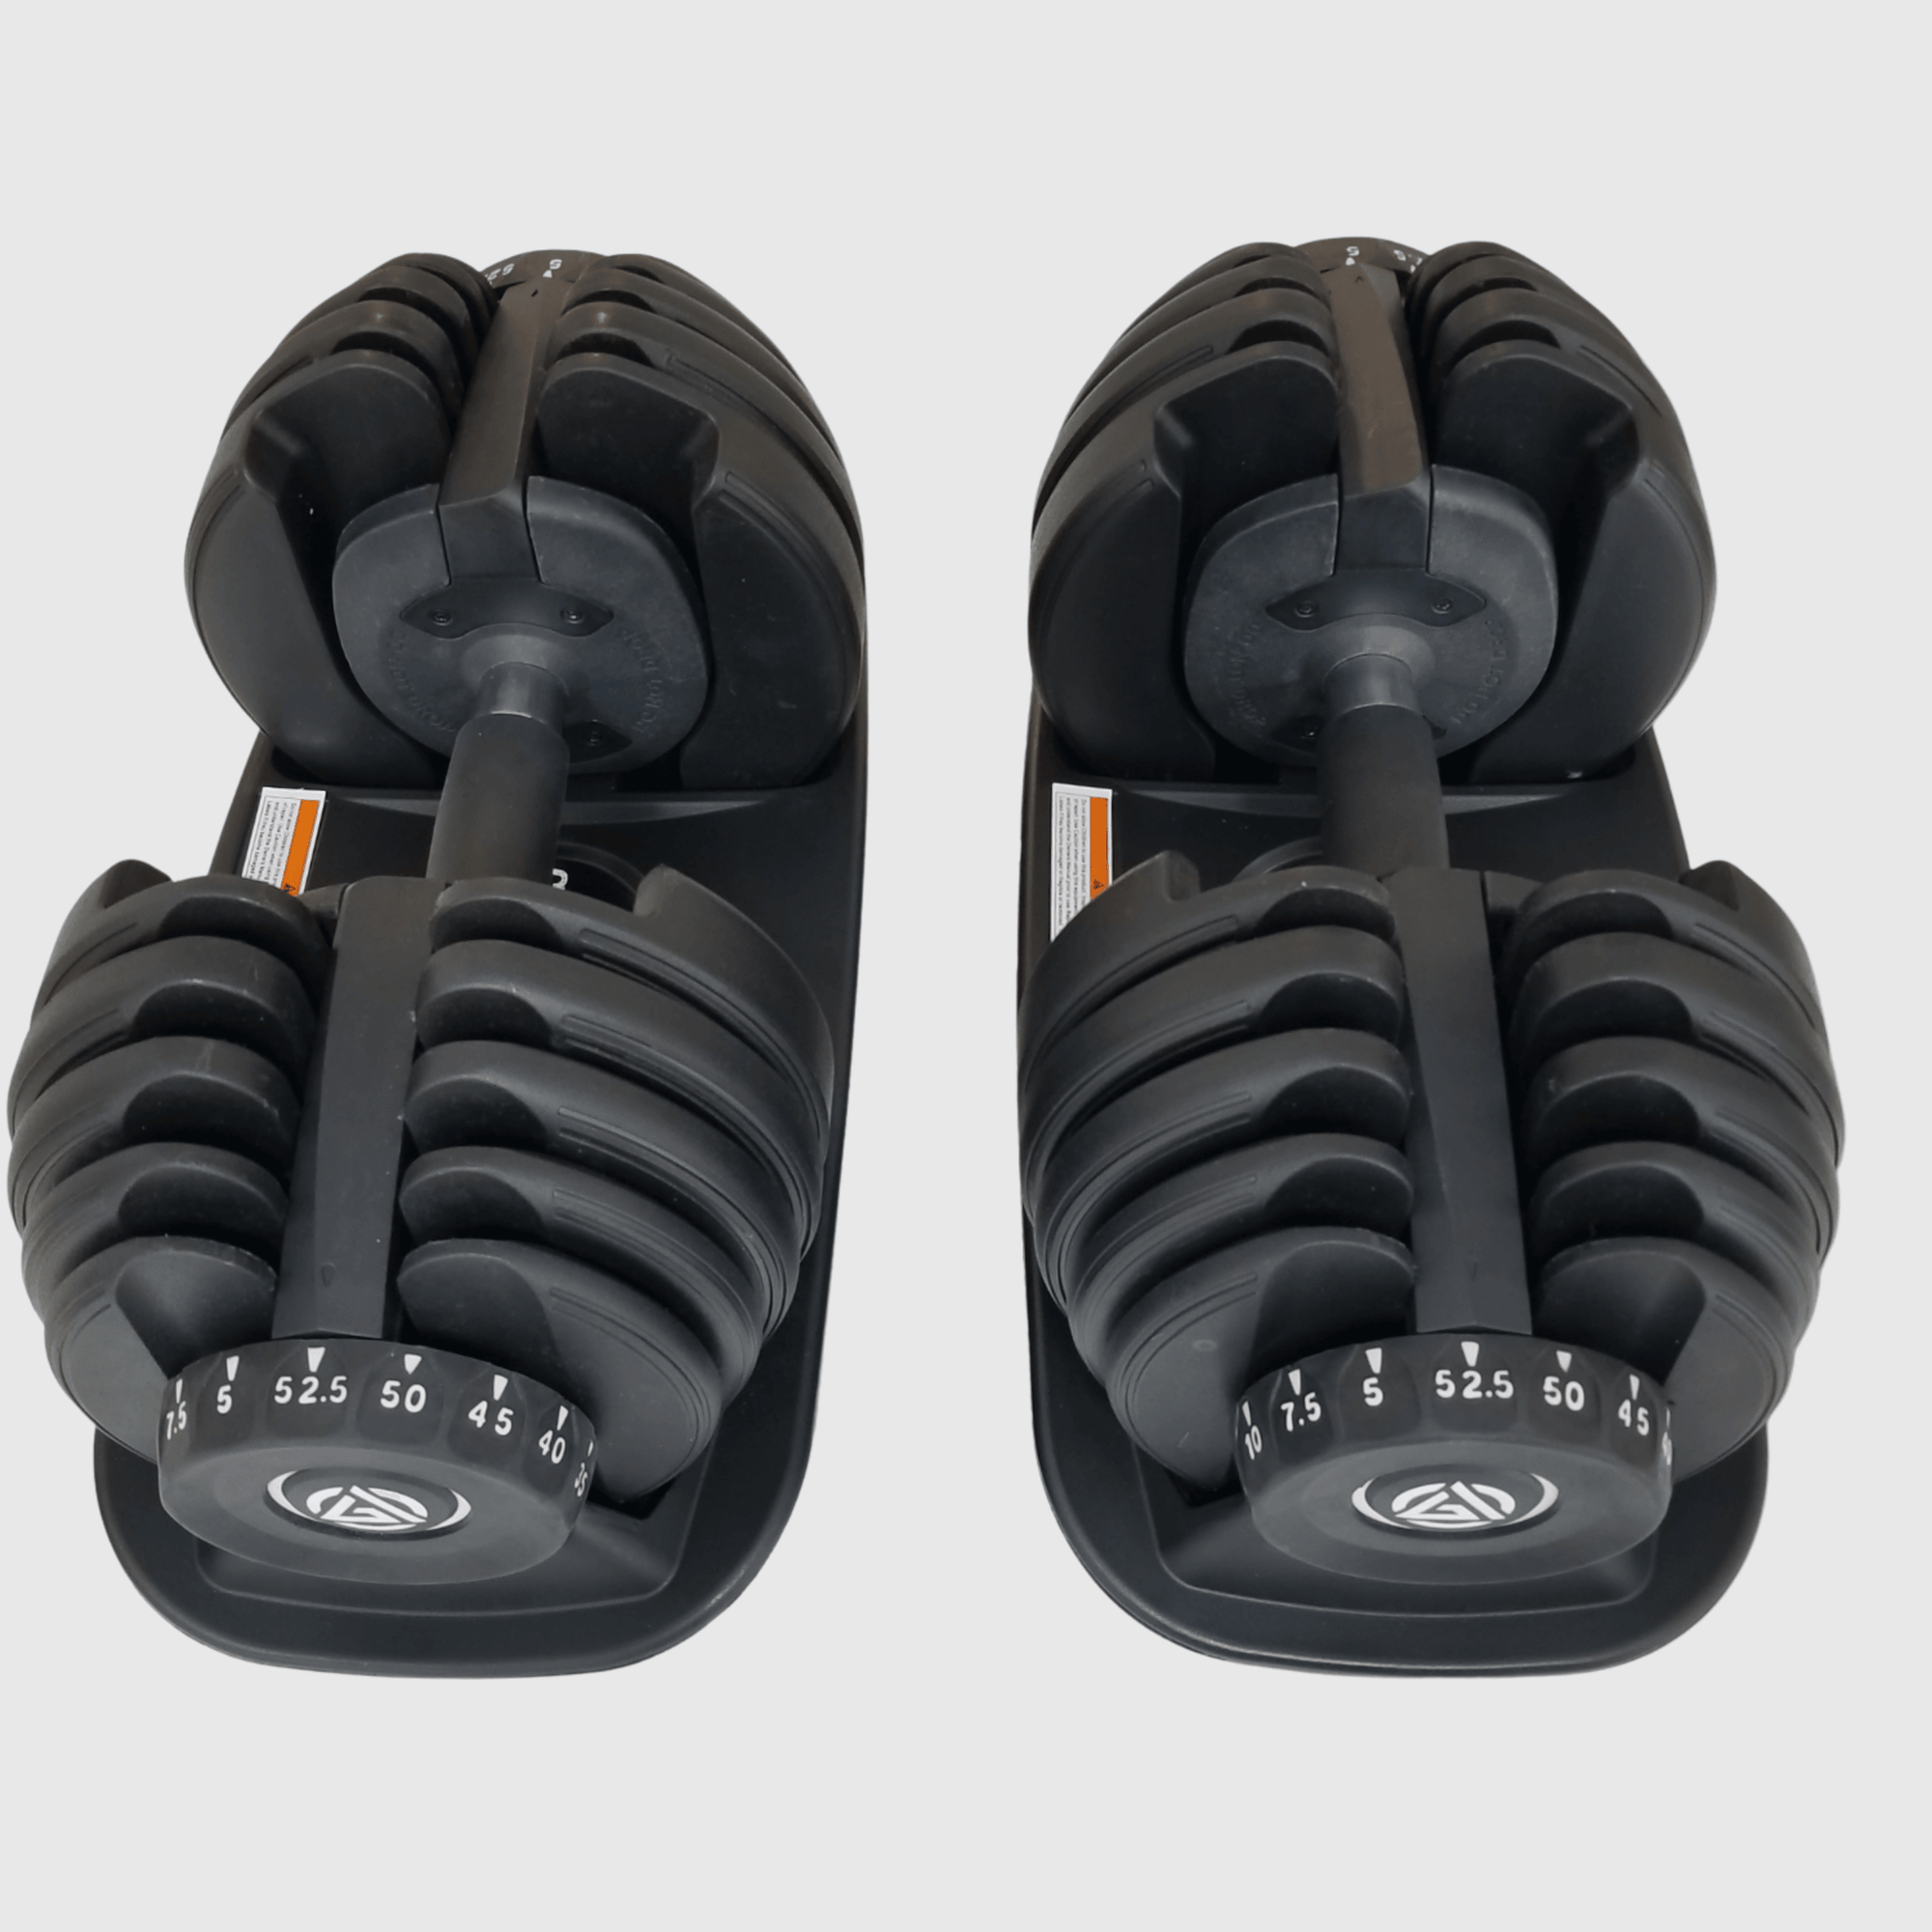 Adjustable Dumbbell (5lbs - 52.5lbs) - Single Dumbbell - Gym Army